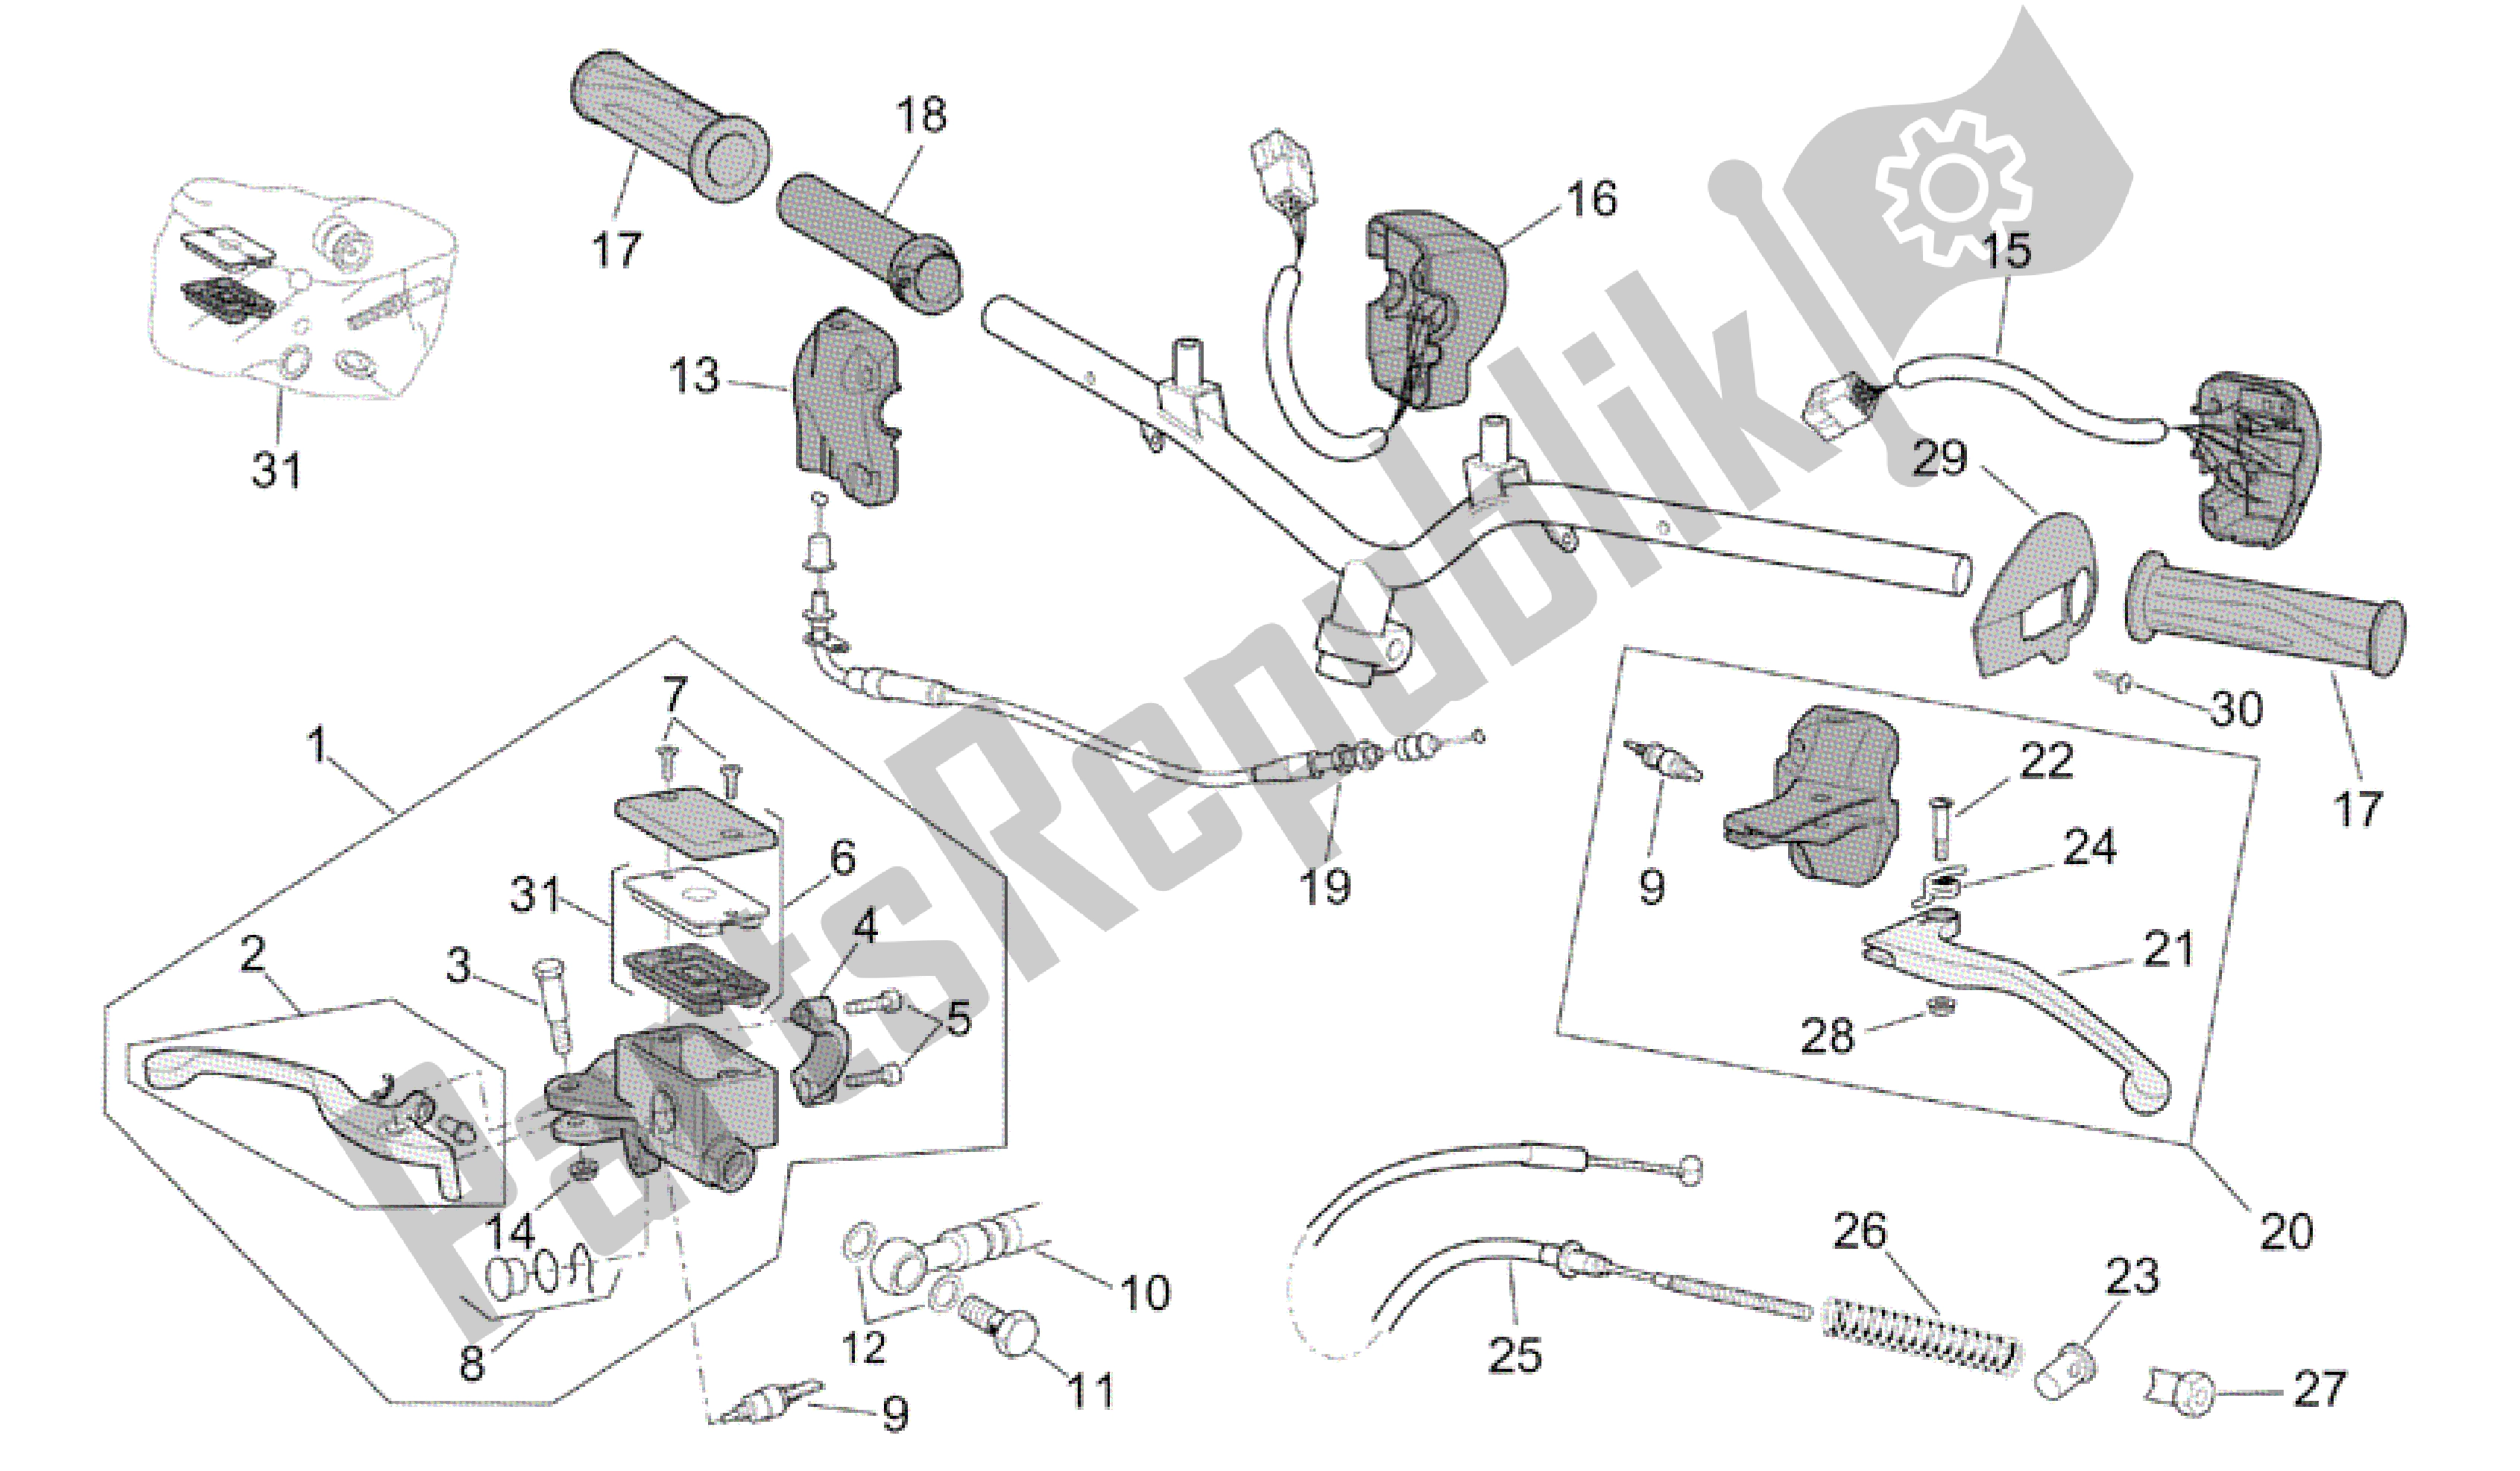 All parts for the Controls of the Aprilia Scarabeo 50 2002 - 2006